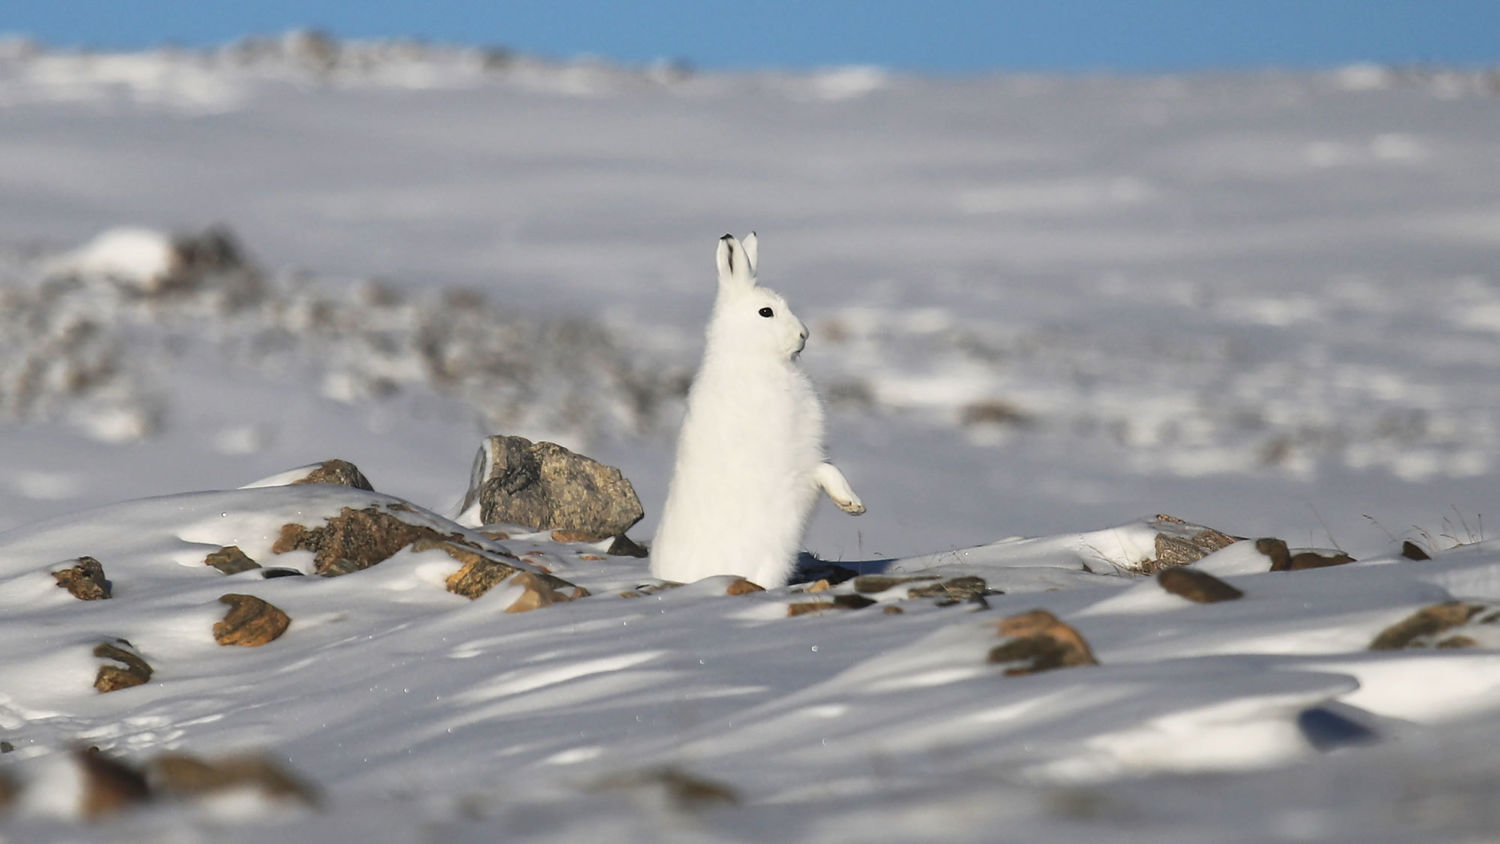 Warming Signs: How Diminished Snow Cover Puts Species in Peril - Yale E360